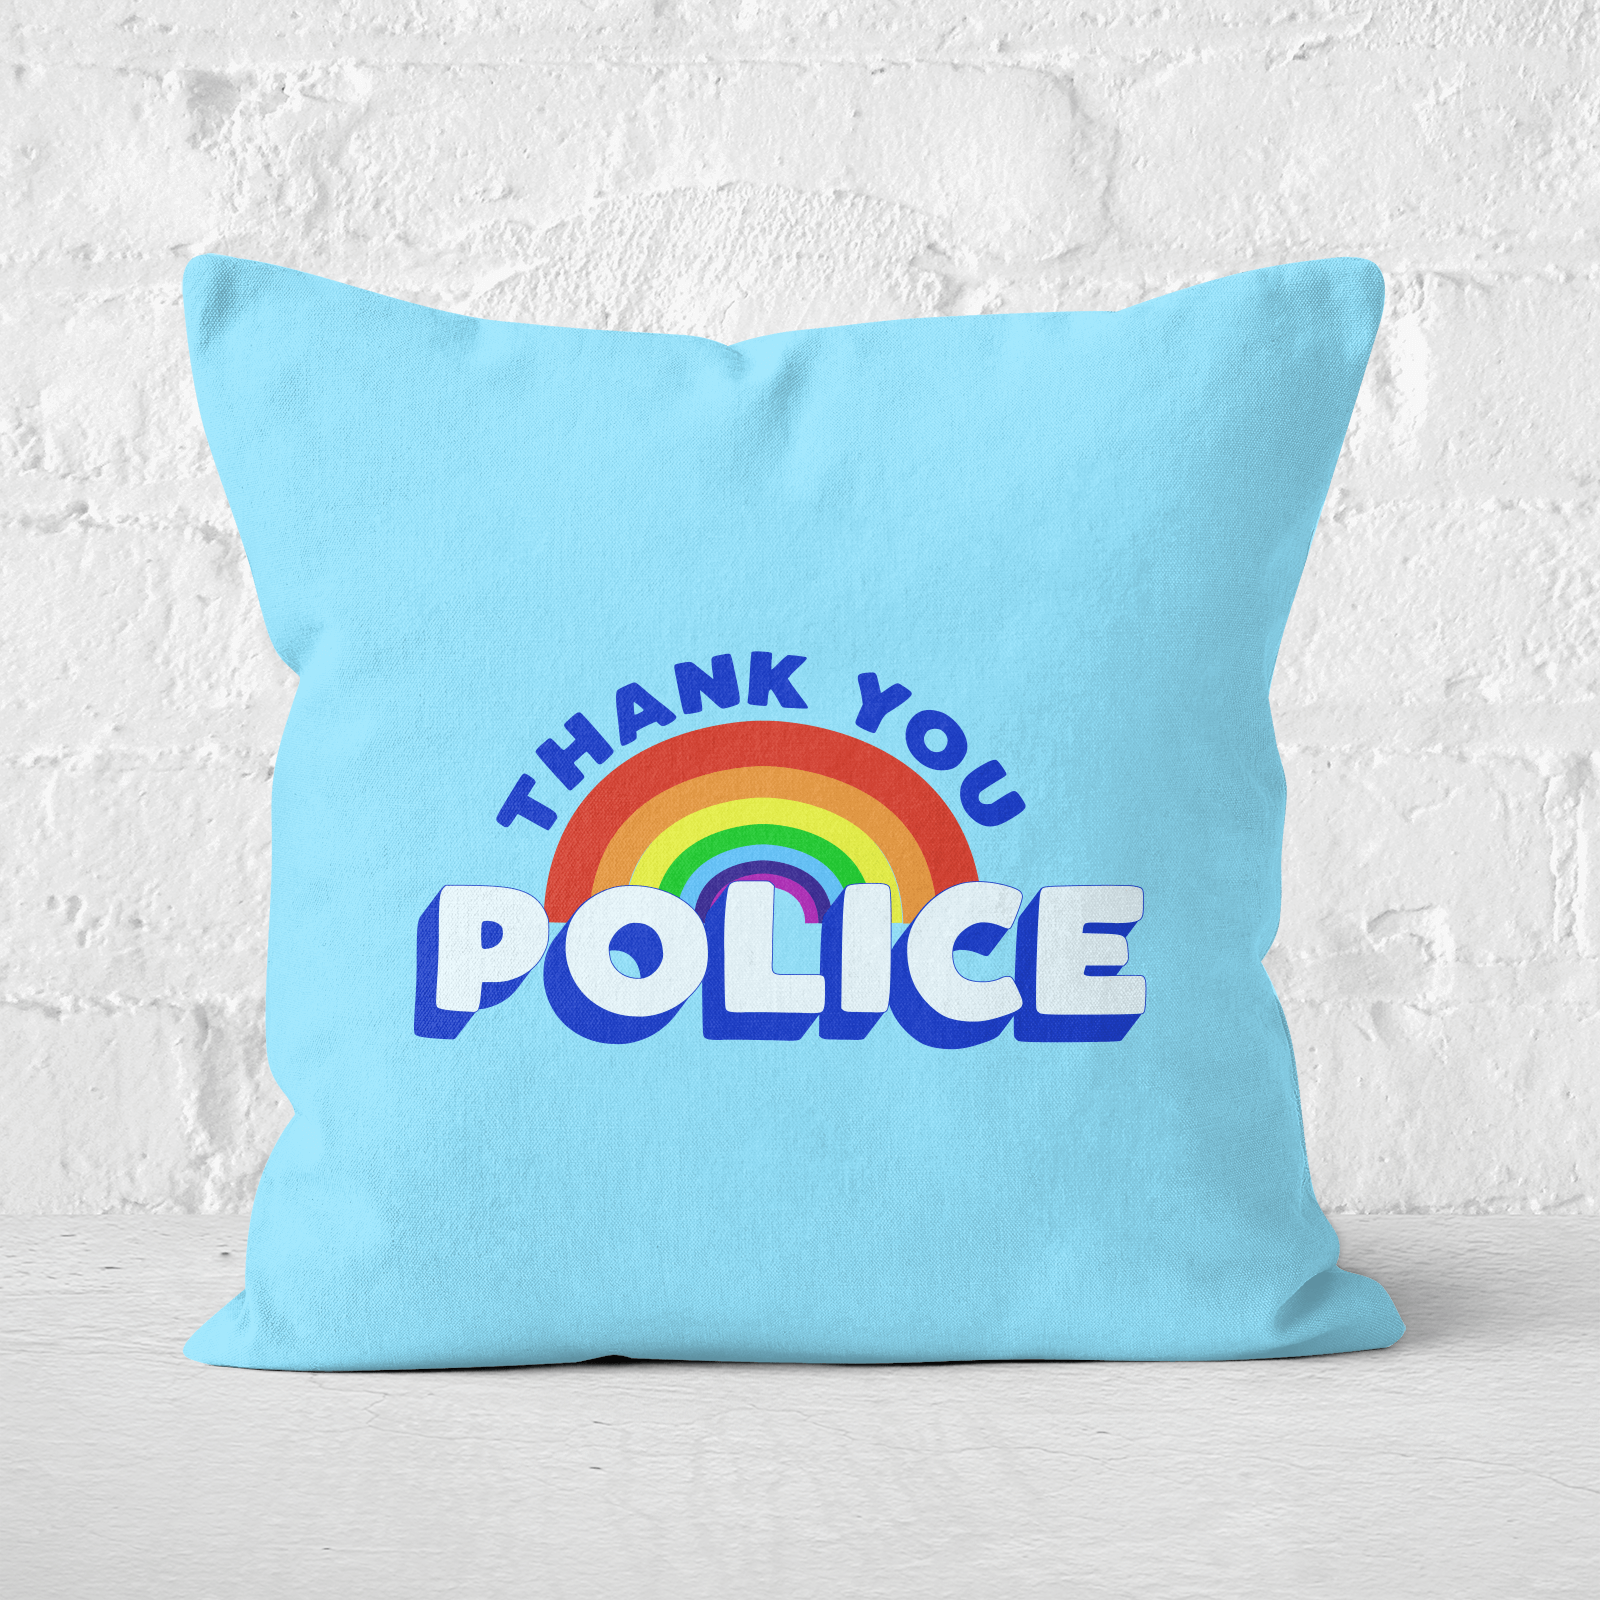 Thank You Police Square Cushion - 60x60cm - Soft Touch